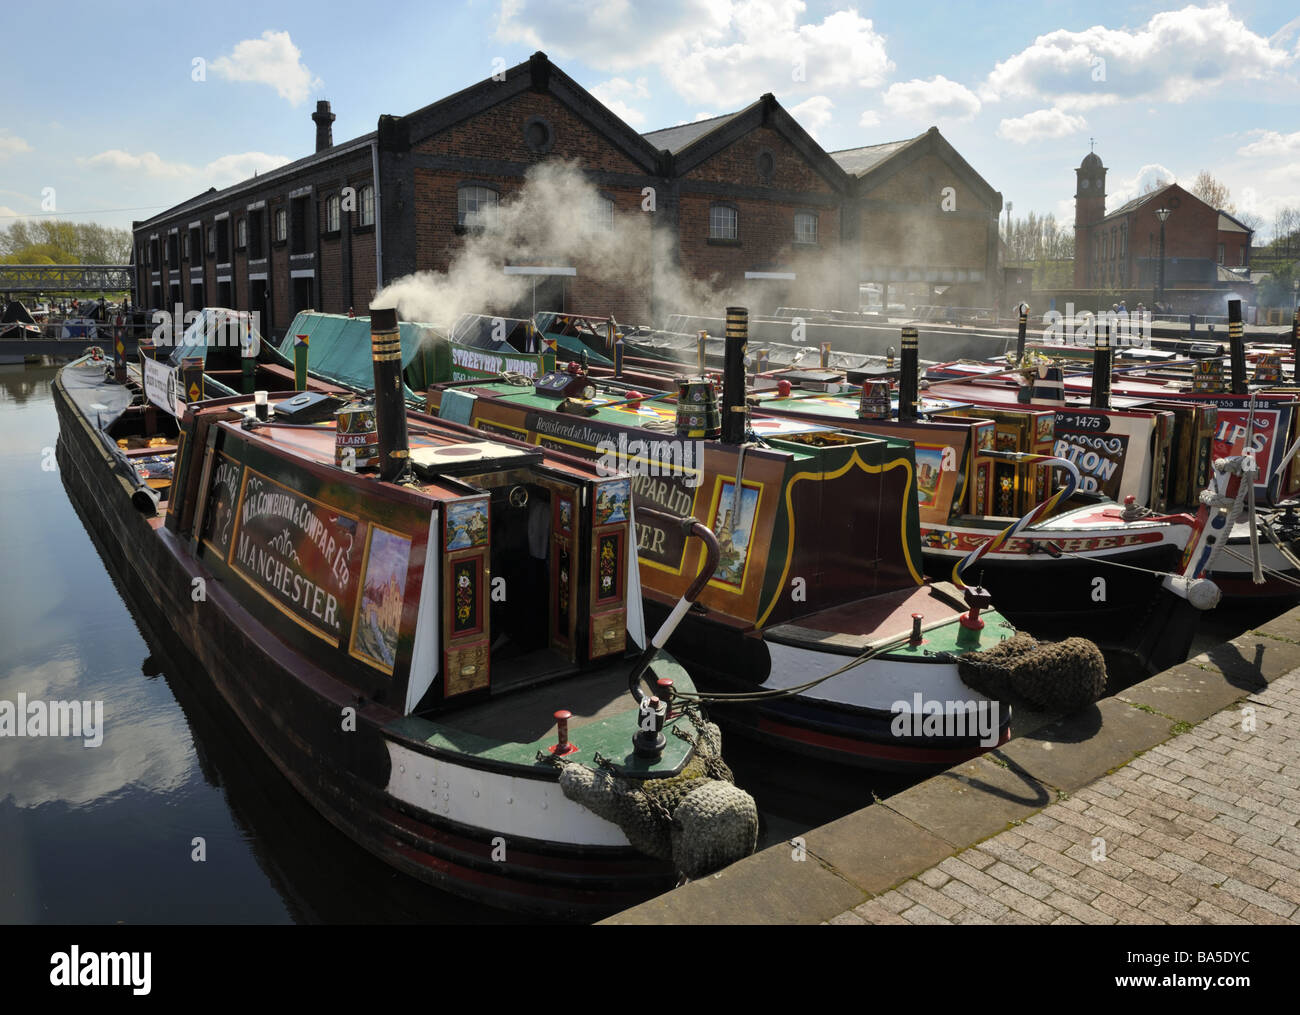 A line of traditional narrowboats at The Boat Museum, Ellesmere Port, Cheshire. Stock Photo